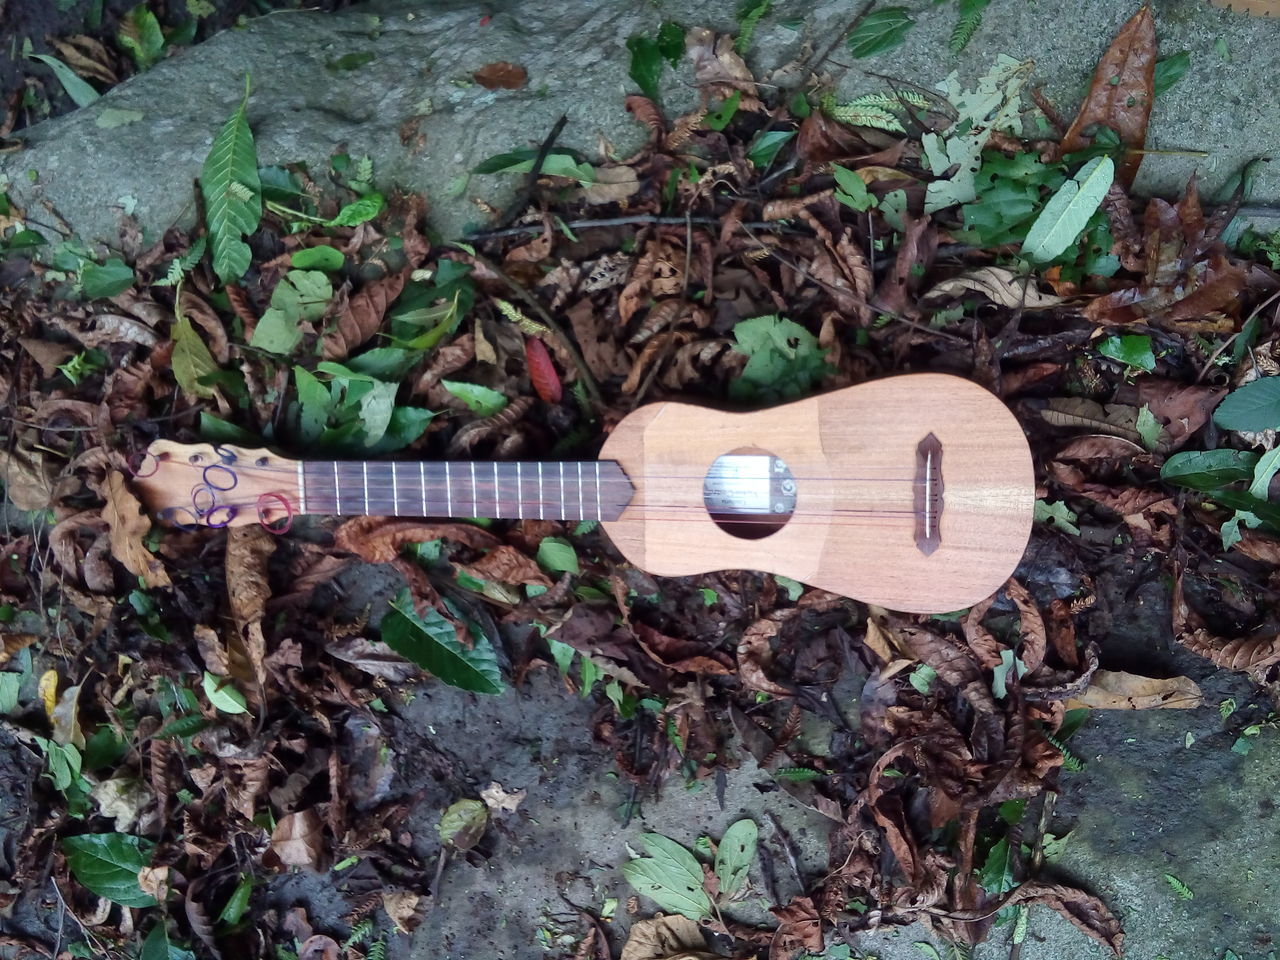 wood - material, day, string instrument, leaf, no people, music, musical instrument, plant part, plant, guitar, nature, close-up, high angle view, tree, brown, single object, outdoors, land, growth, forest